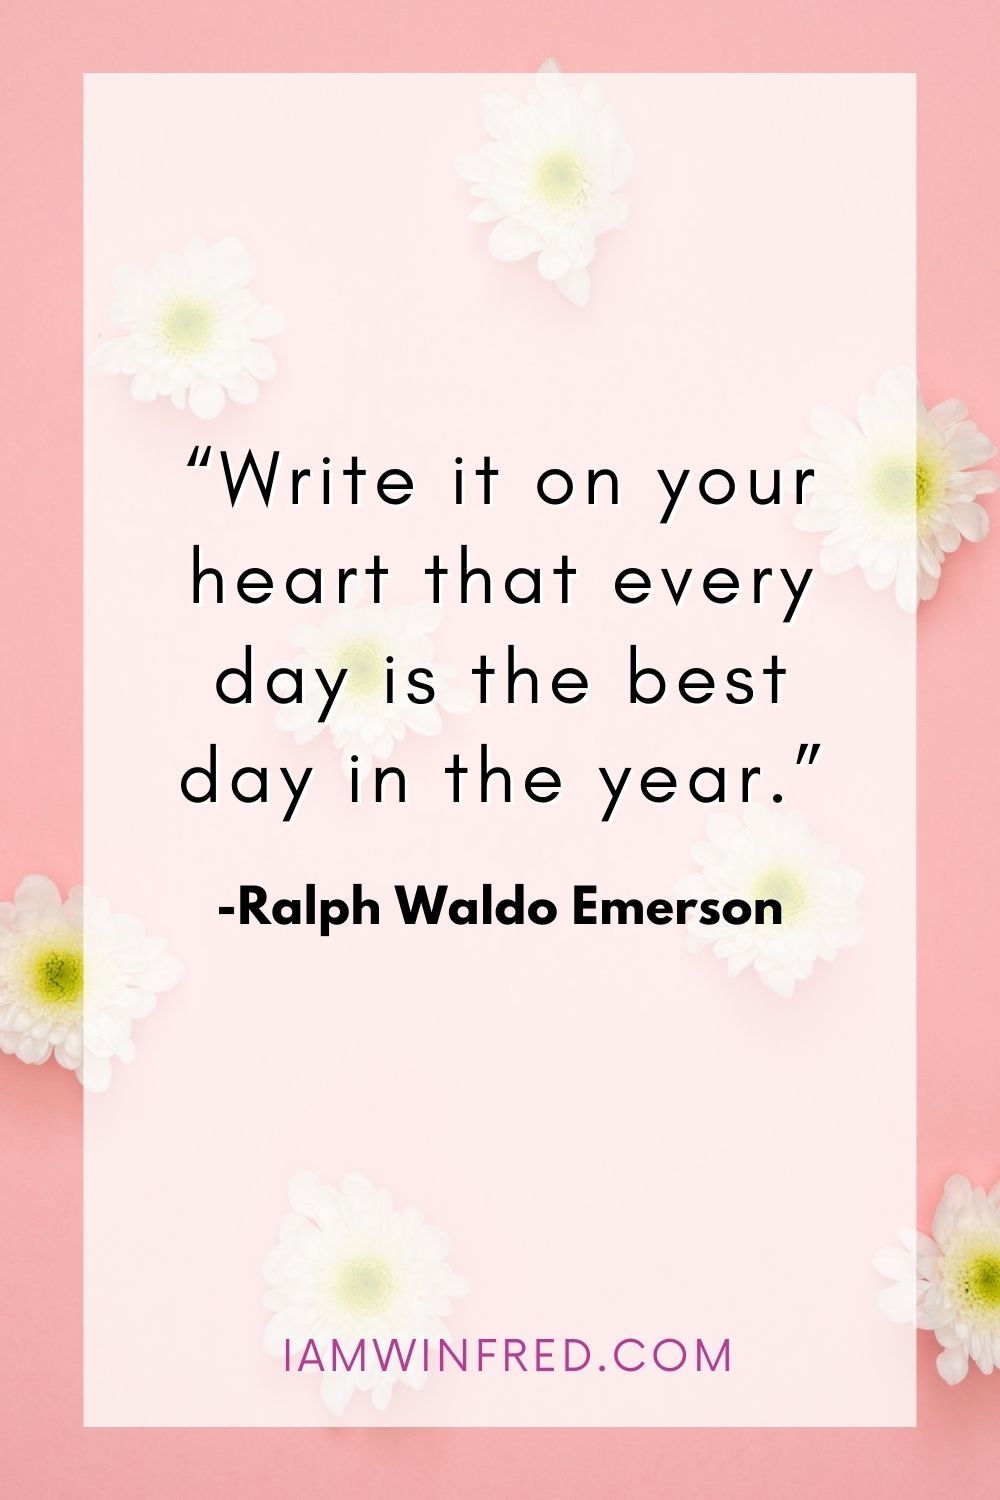 Write It On Your Heart That Every Day Is The Best Day In The Year.